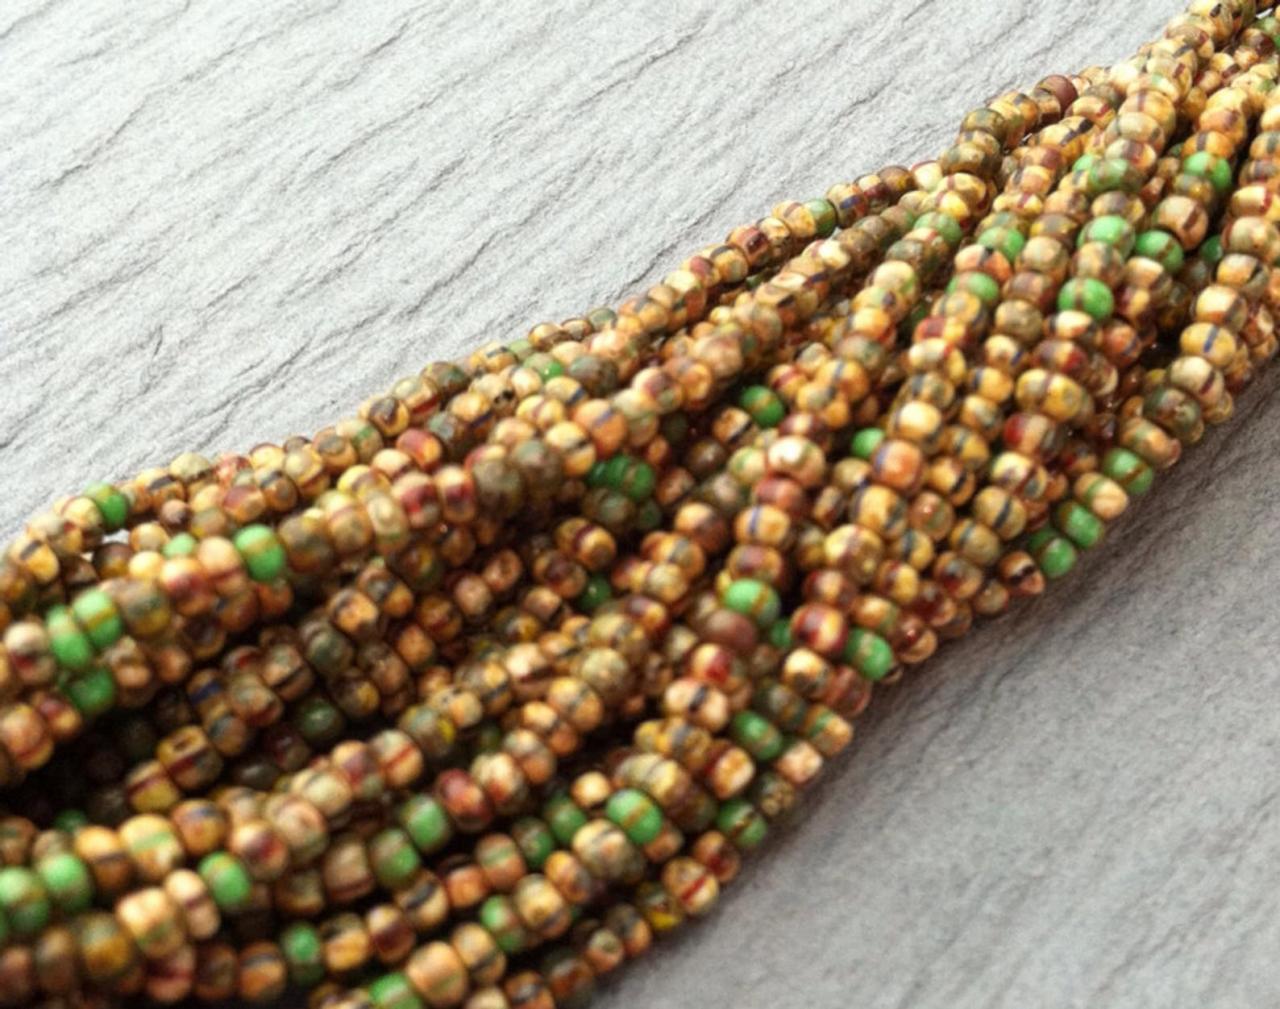 Czech 11/0 Seed Beads Aged Picasso Stripe Green Earth Tone Mix Brown Tan